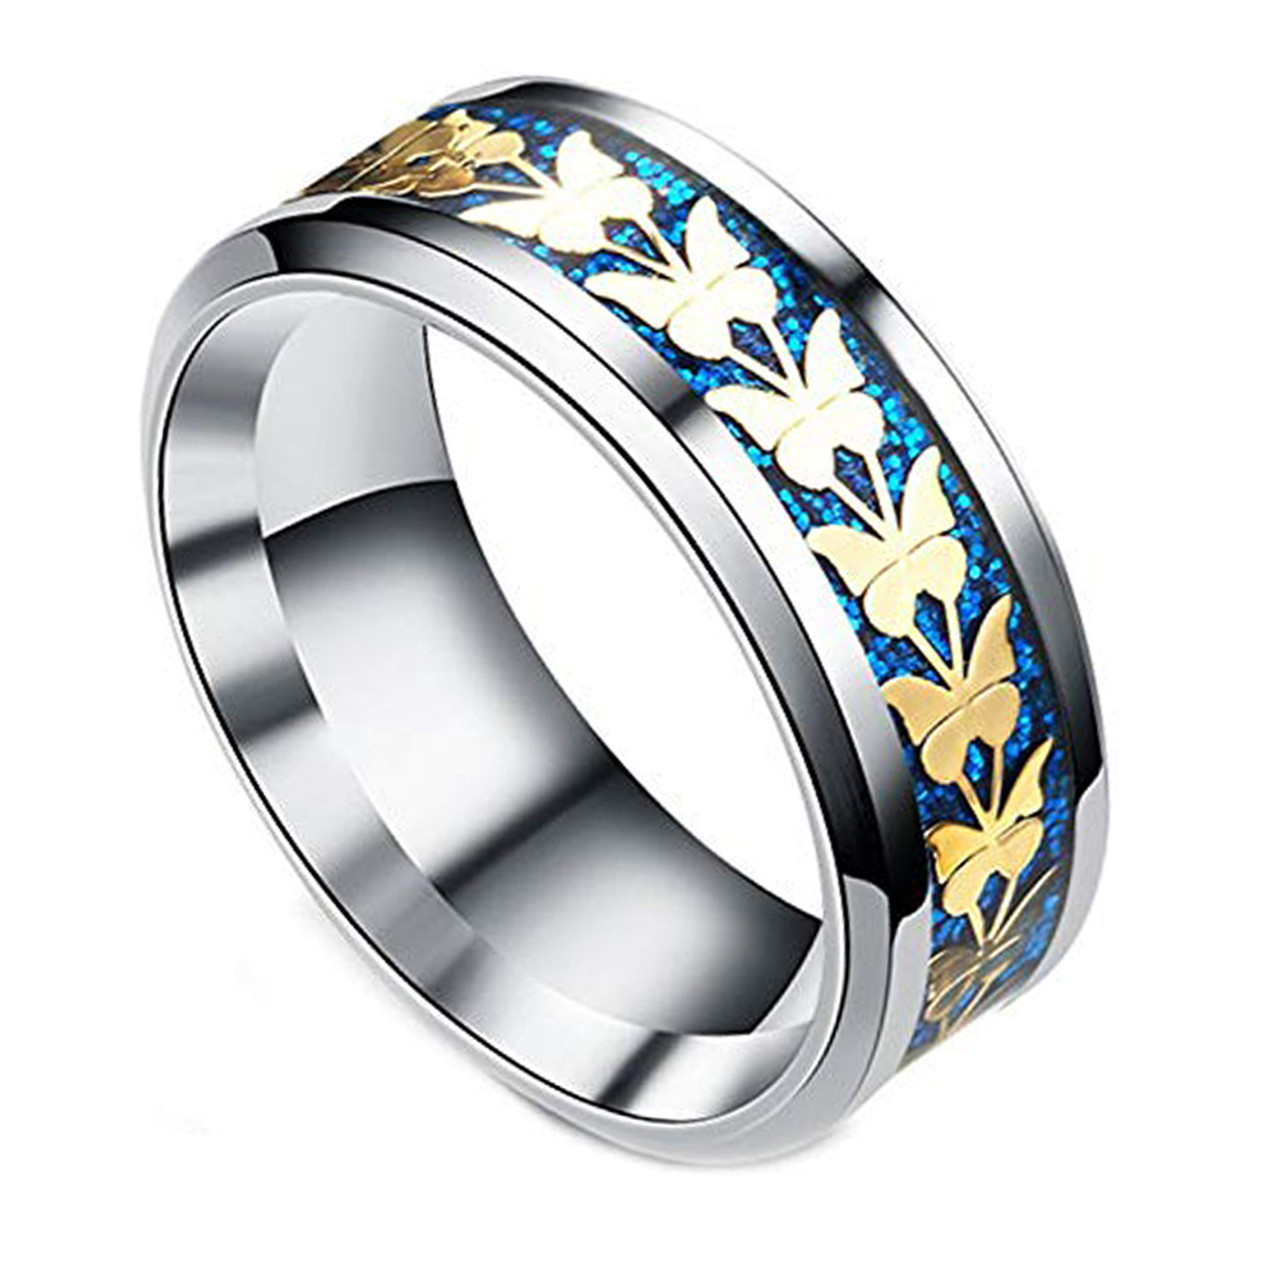 8mm - Unisex, Women's or Men's Butterfly Wedding Band. Silver Steel Ring with Butterflies over Blue Sandy Inlay